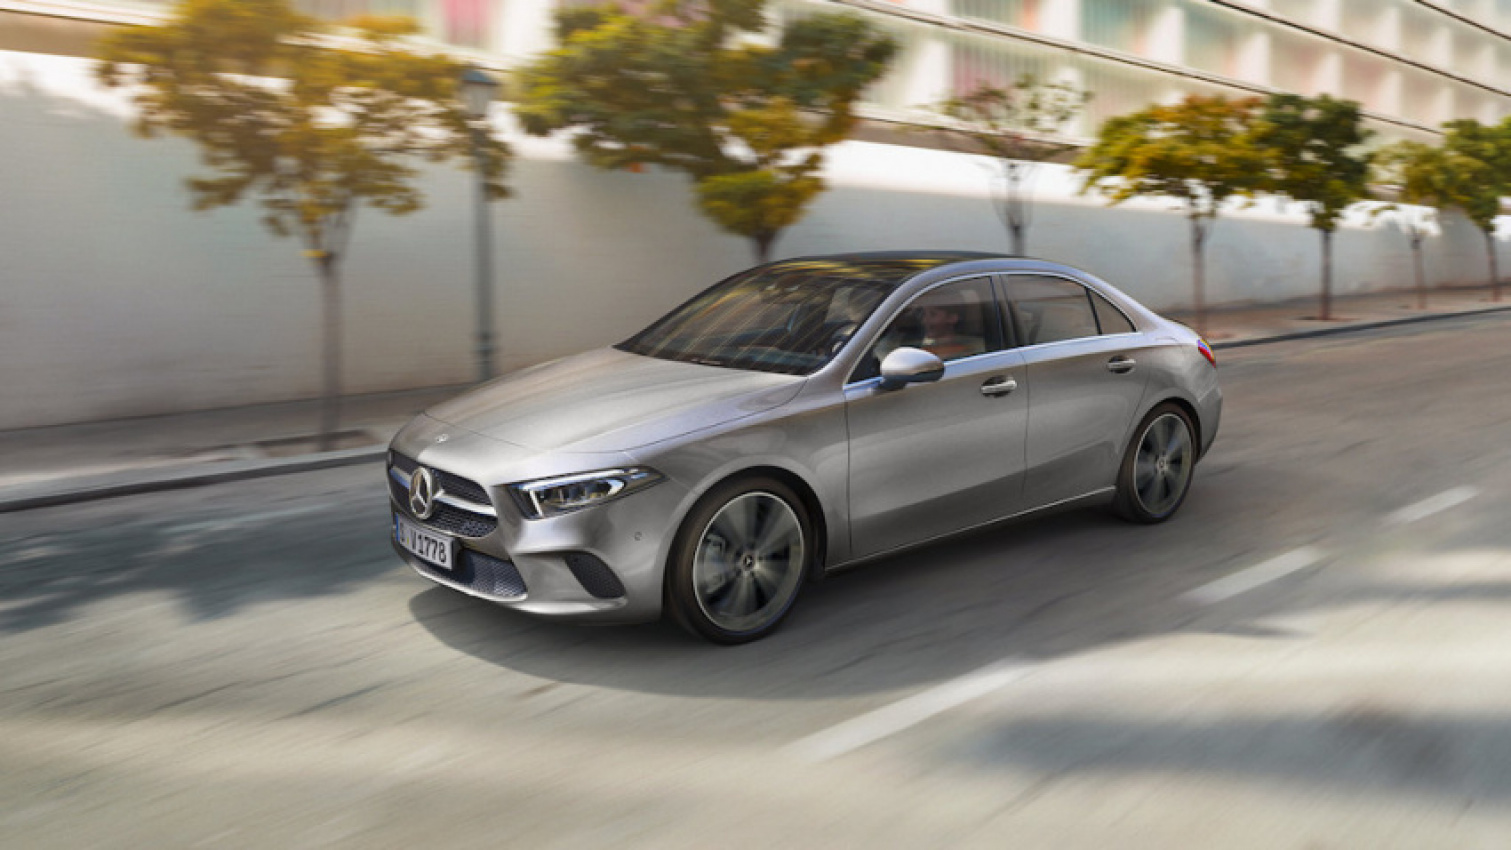 autos, cars, mercedes-benz, mercedes, mercedes-benz a-class, mercedes-benz cla-class, mercedes-benz gla-class, mercedes-benz glc-class, mercedes-benz v-class, news, mercedes-benz ph offering as much as p 500k in savings this march